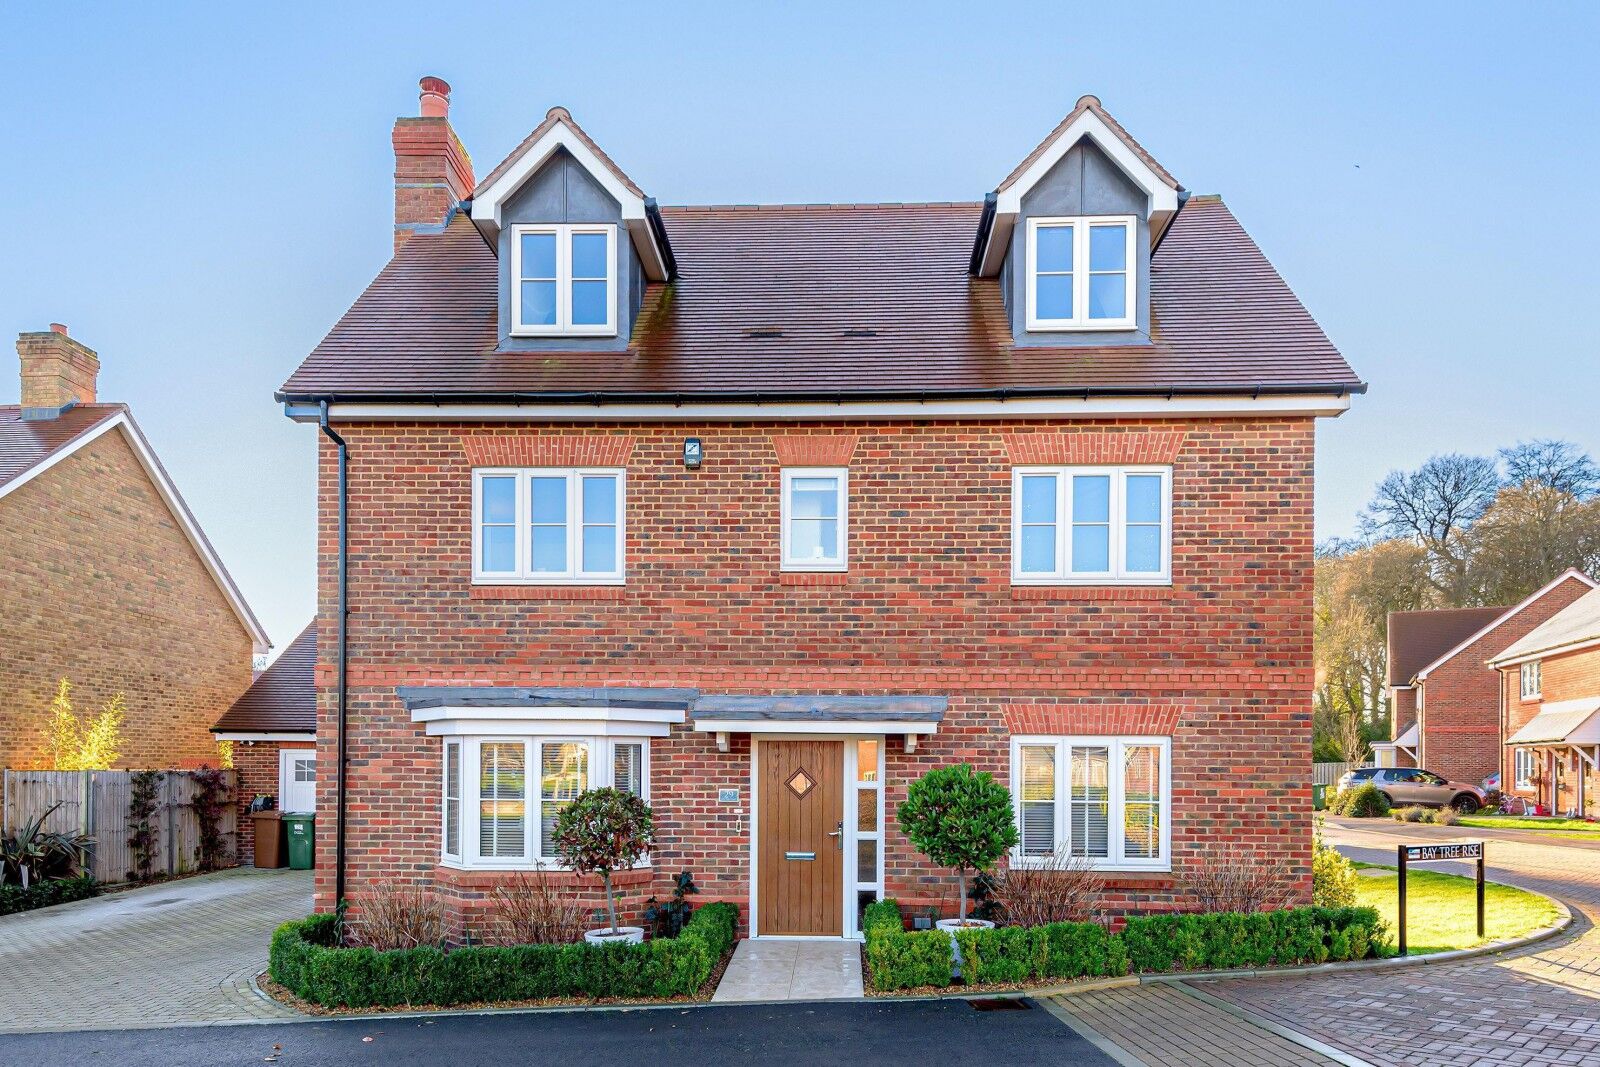 5 bedroom detached house for sale Bay Tree Rise, Sonning Common, RG4, main image